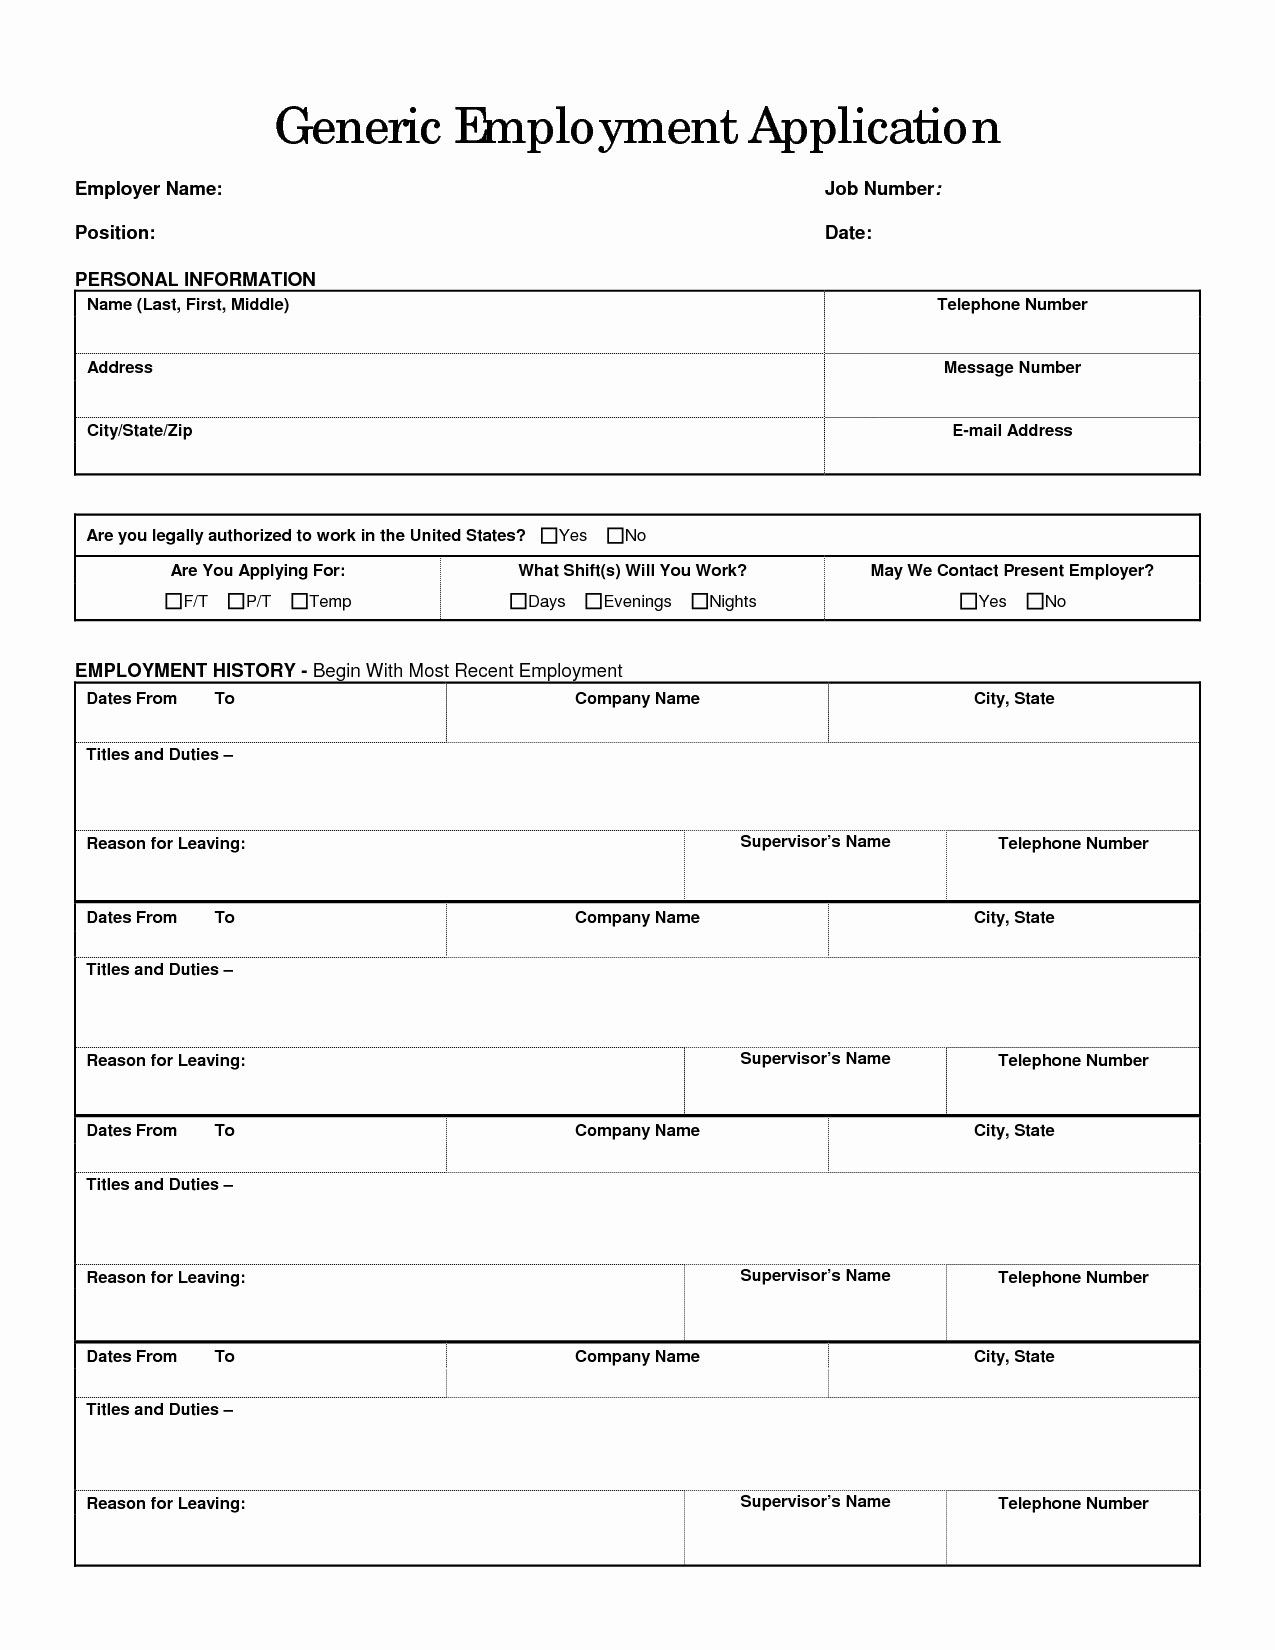 Free Generic Employment Application Lovely 9 Best Of Practice Job Application forms Printable